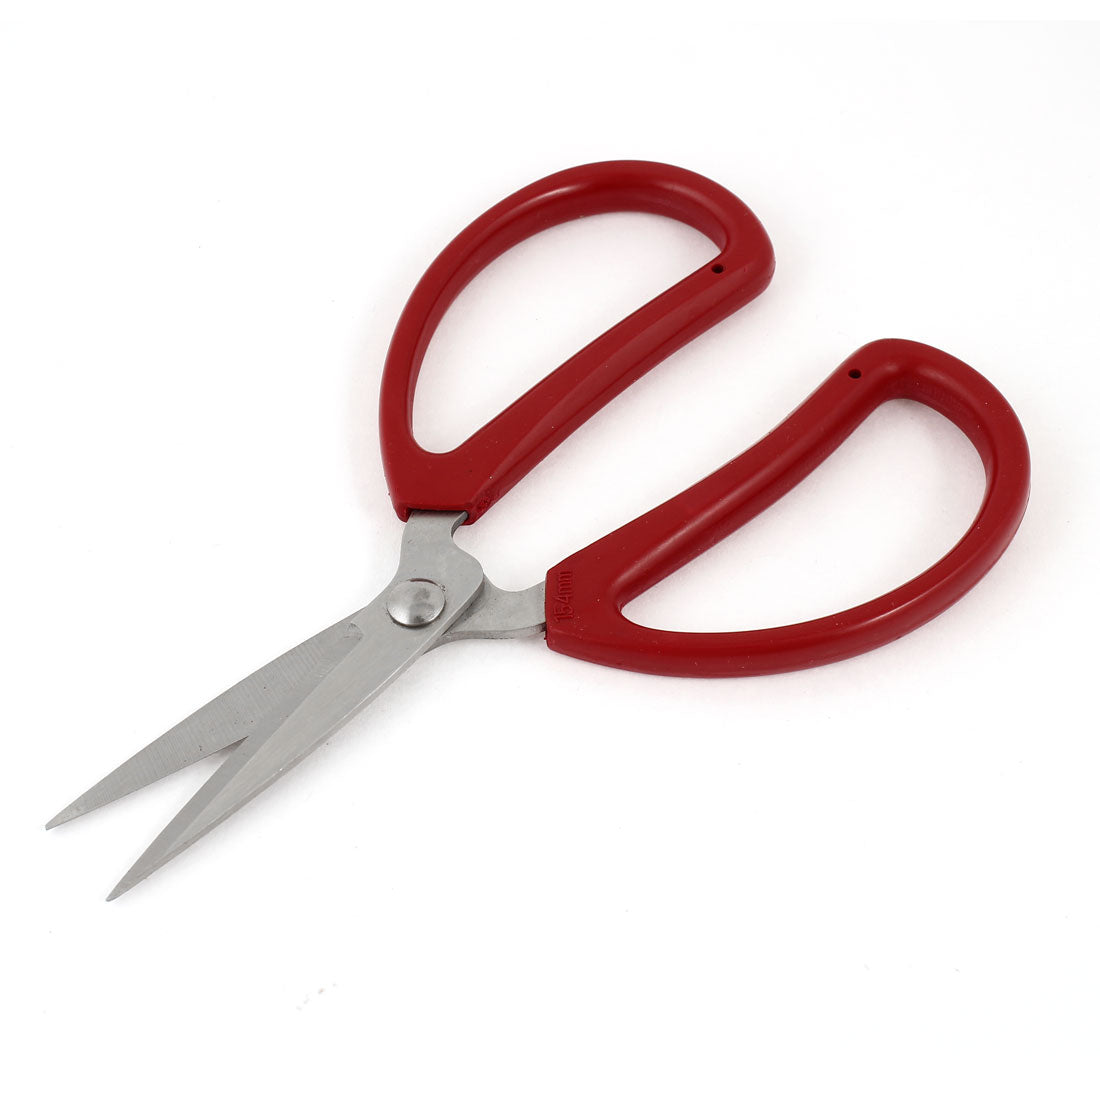 uxcell Uxcell Home Kitchen Red Rubber Coated Handles Metal Cutter Scissors 15cm Long